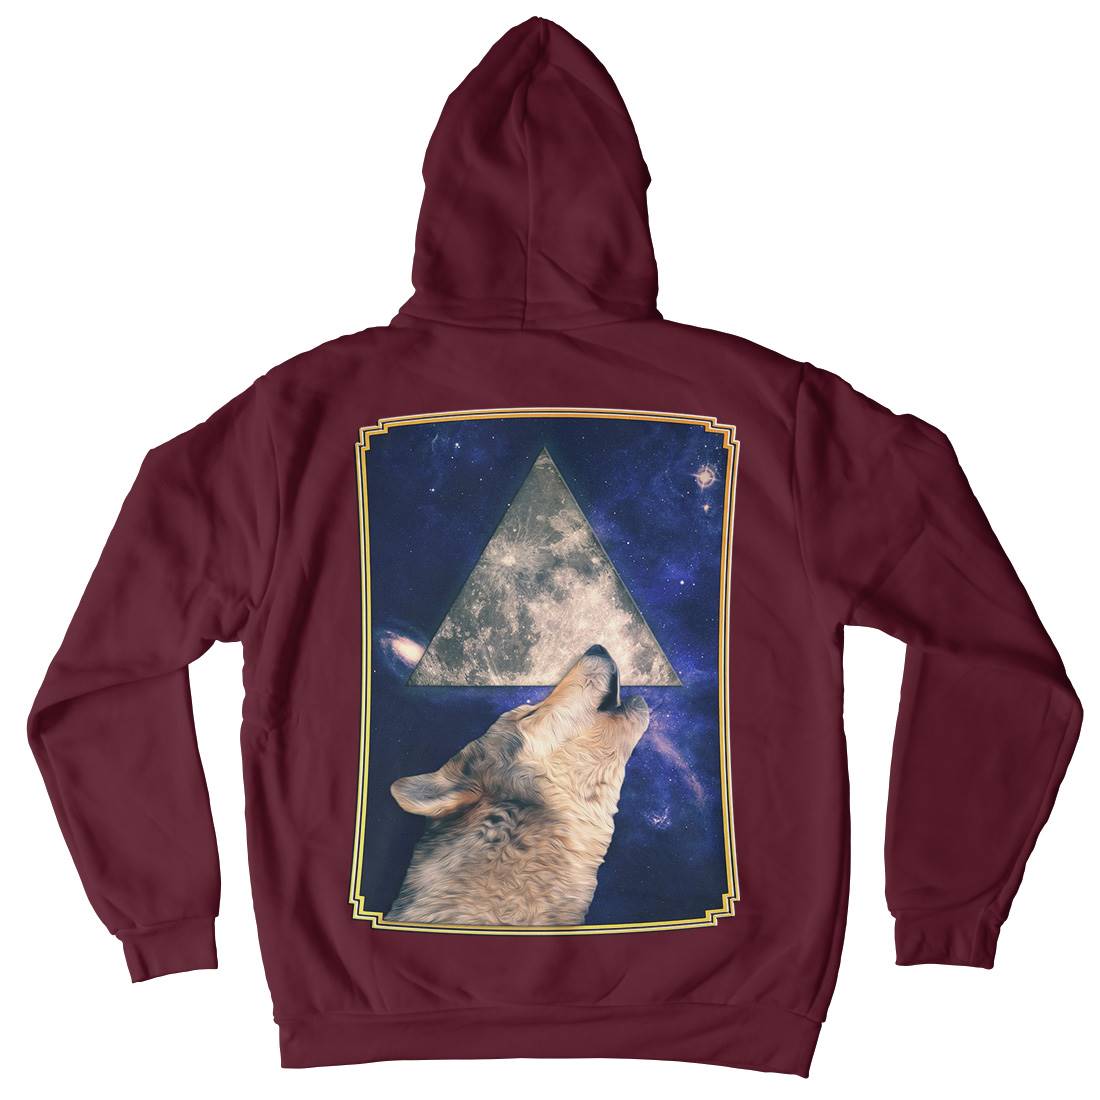 Howling Wolf Kids Crew Neck Hoodie Space A848